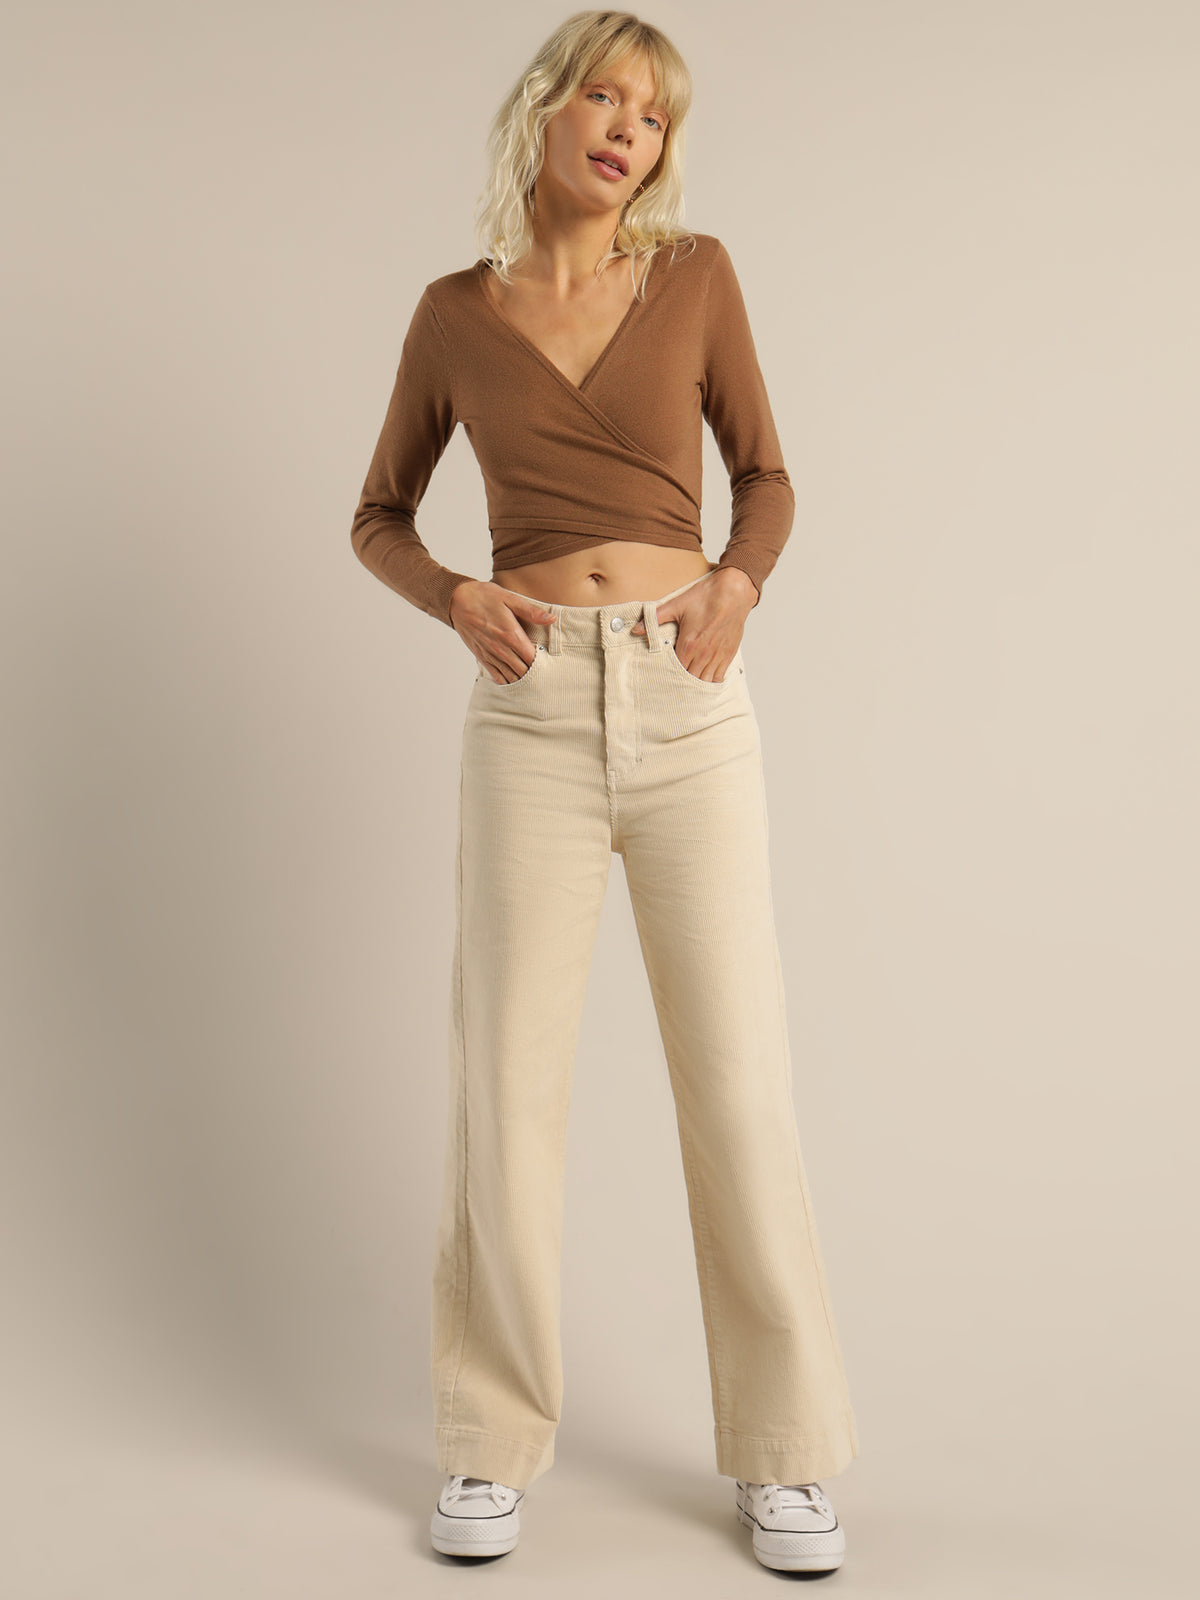 Stace Wrap Knit Top in Toffee